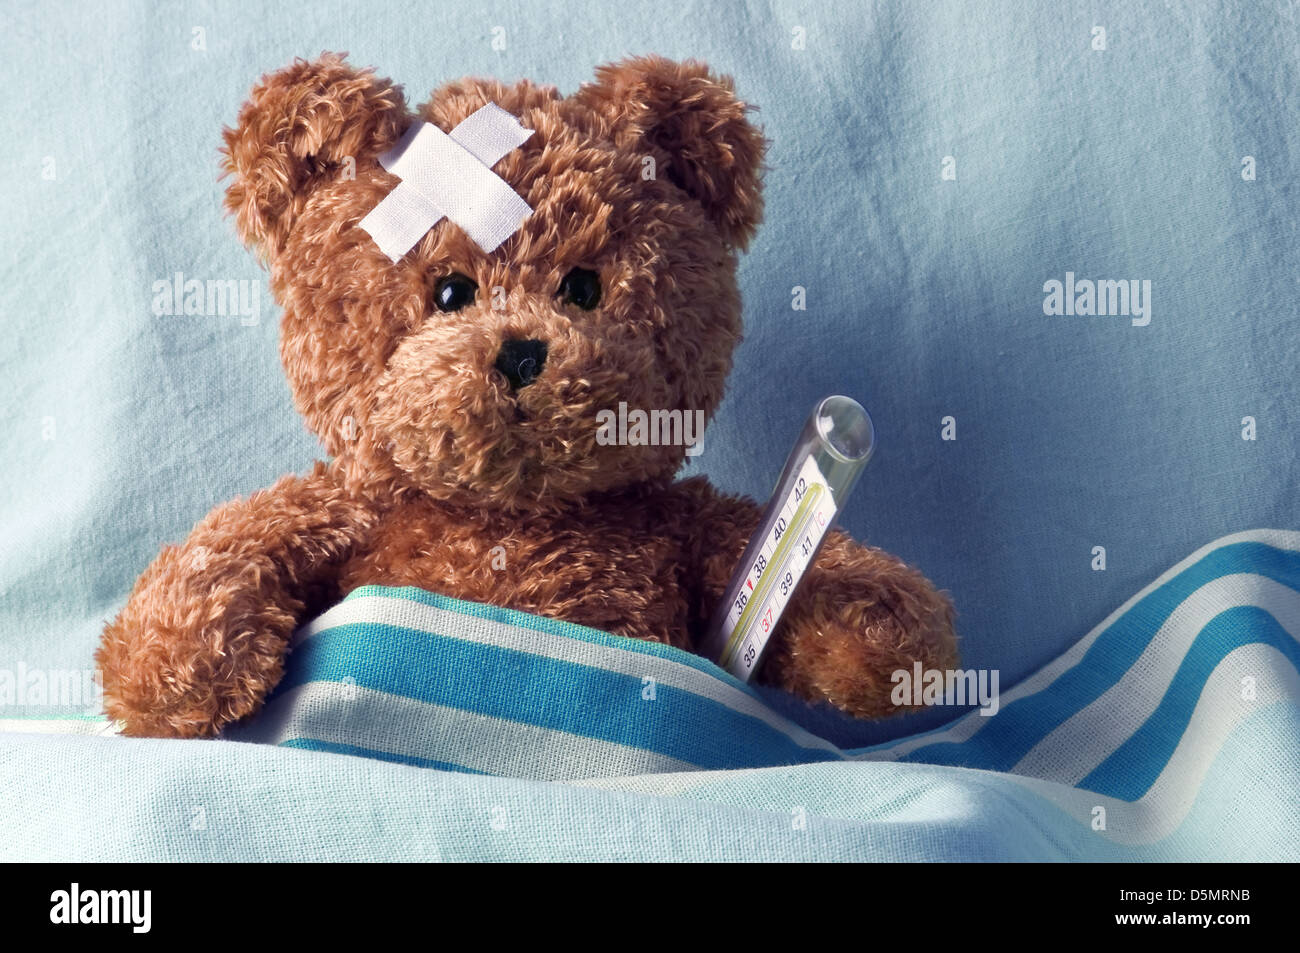 bear in bed with thermometer and plaster Stock Photo